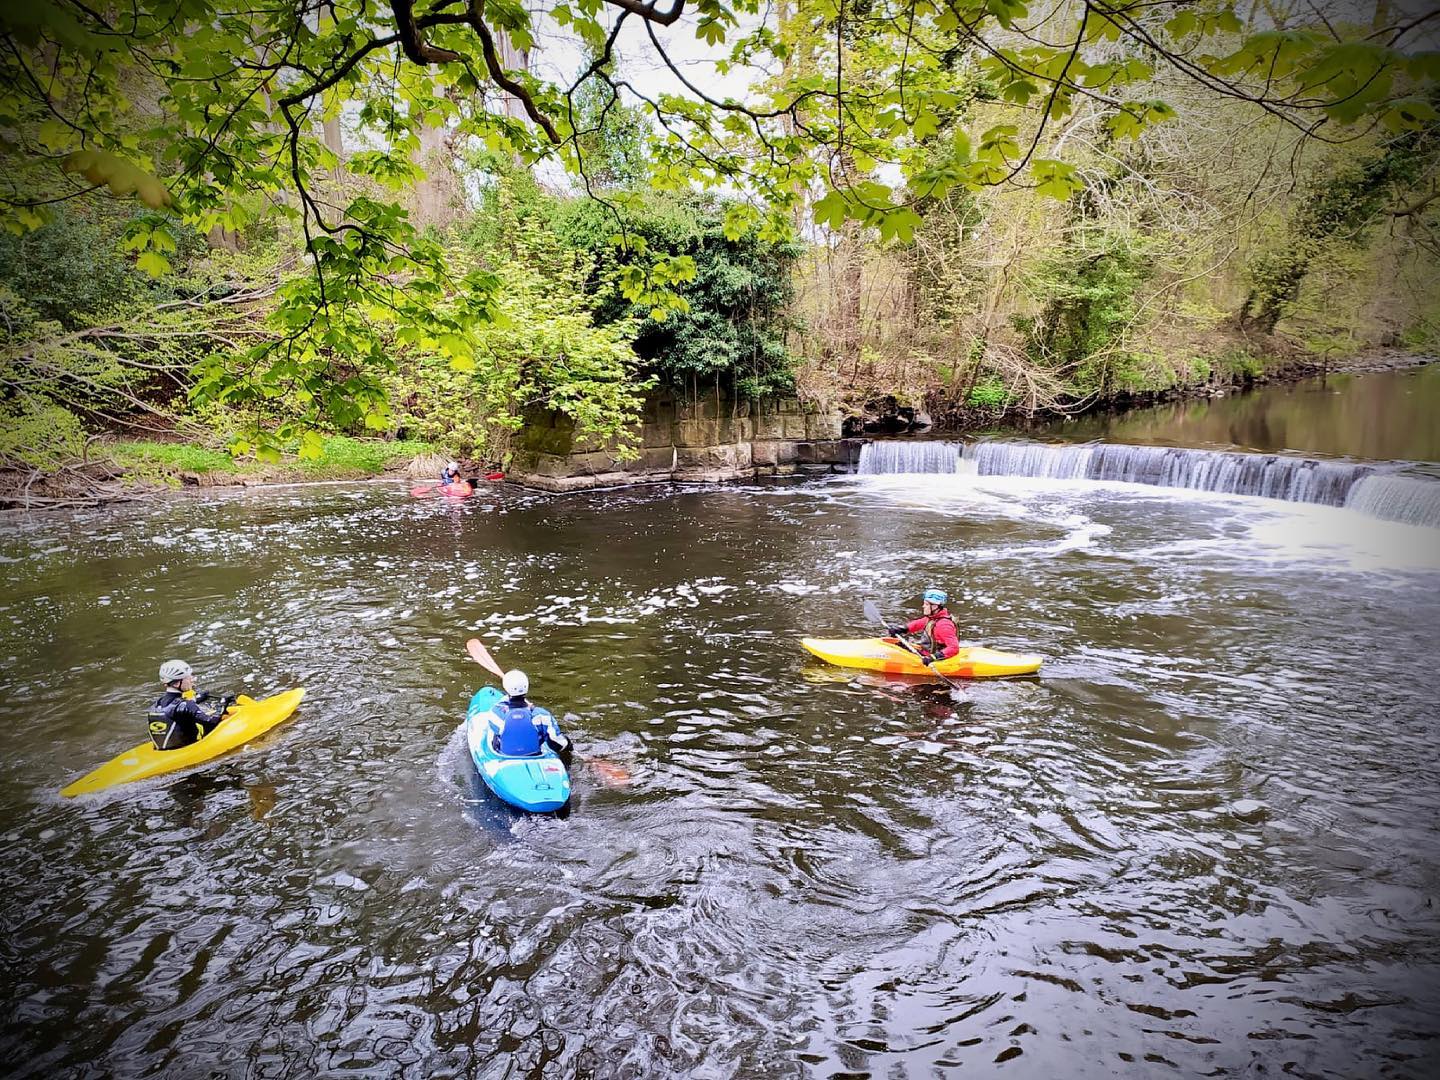 We love receiving great reviews on TripAdvisor, like this one from Adam who came kayaking with us over the weekend: 

“Great weekend spent with Wilderness Development with the team, getting certified for the upcoming Raid in France 2021 expedition race.

Covered:
- Kayaking skills
- Rope skills
- Caving navigation
- Environmental considerations in the respective disciplines, fauna & flora.

Slickly organised, great trainers (John, Chris & Pete), with the course built specifically to our requirements, and focused on maximising our race experience over and above the certification details.

If I need more certs in the future, I'll be back.

Thanks, Will & co!